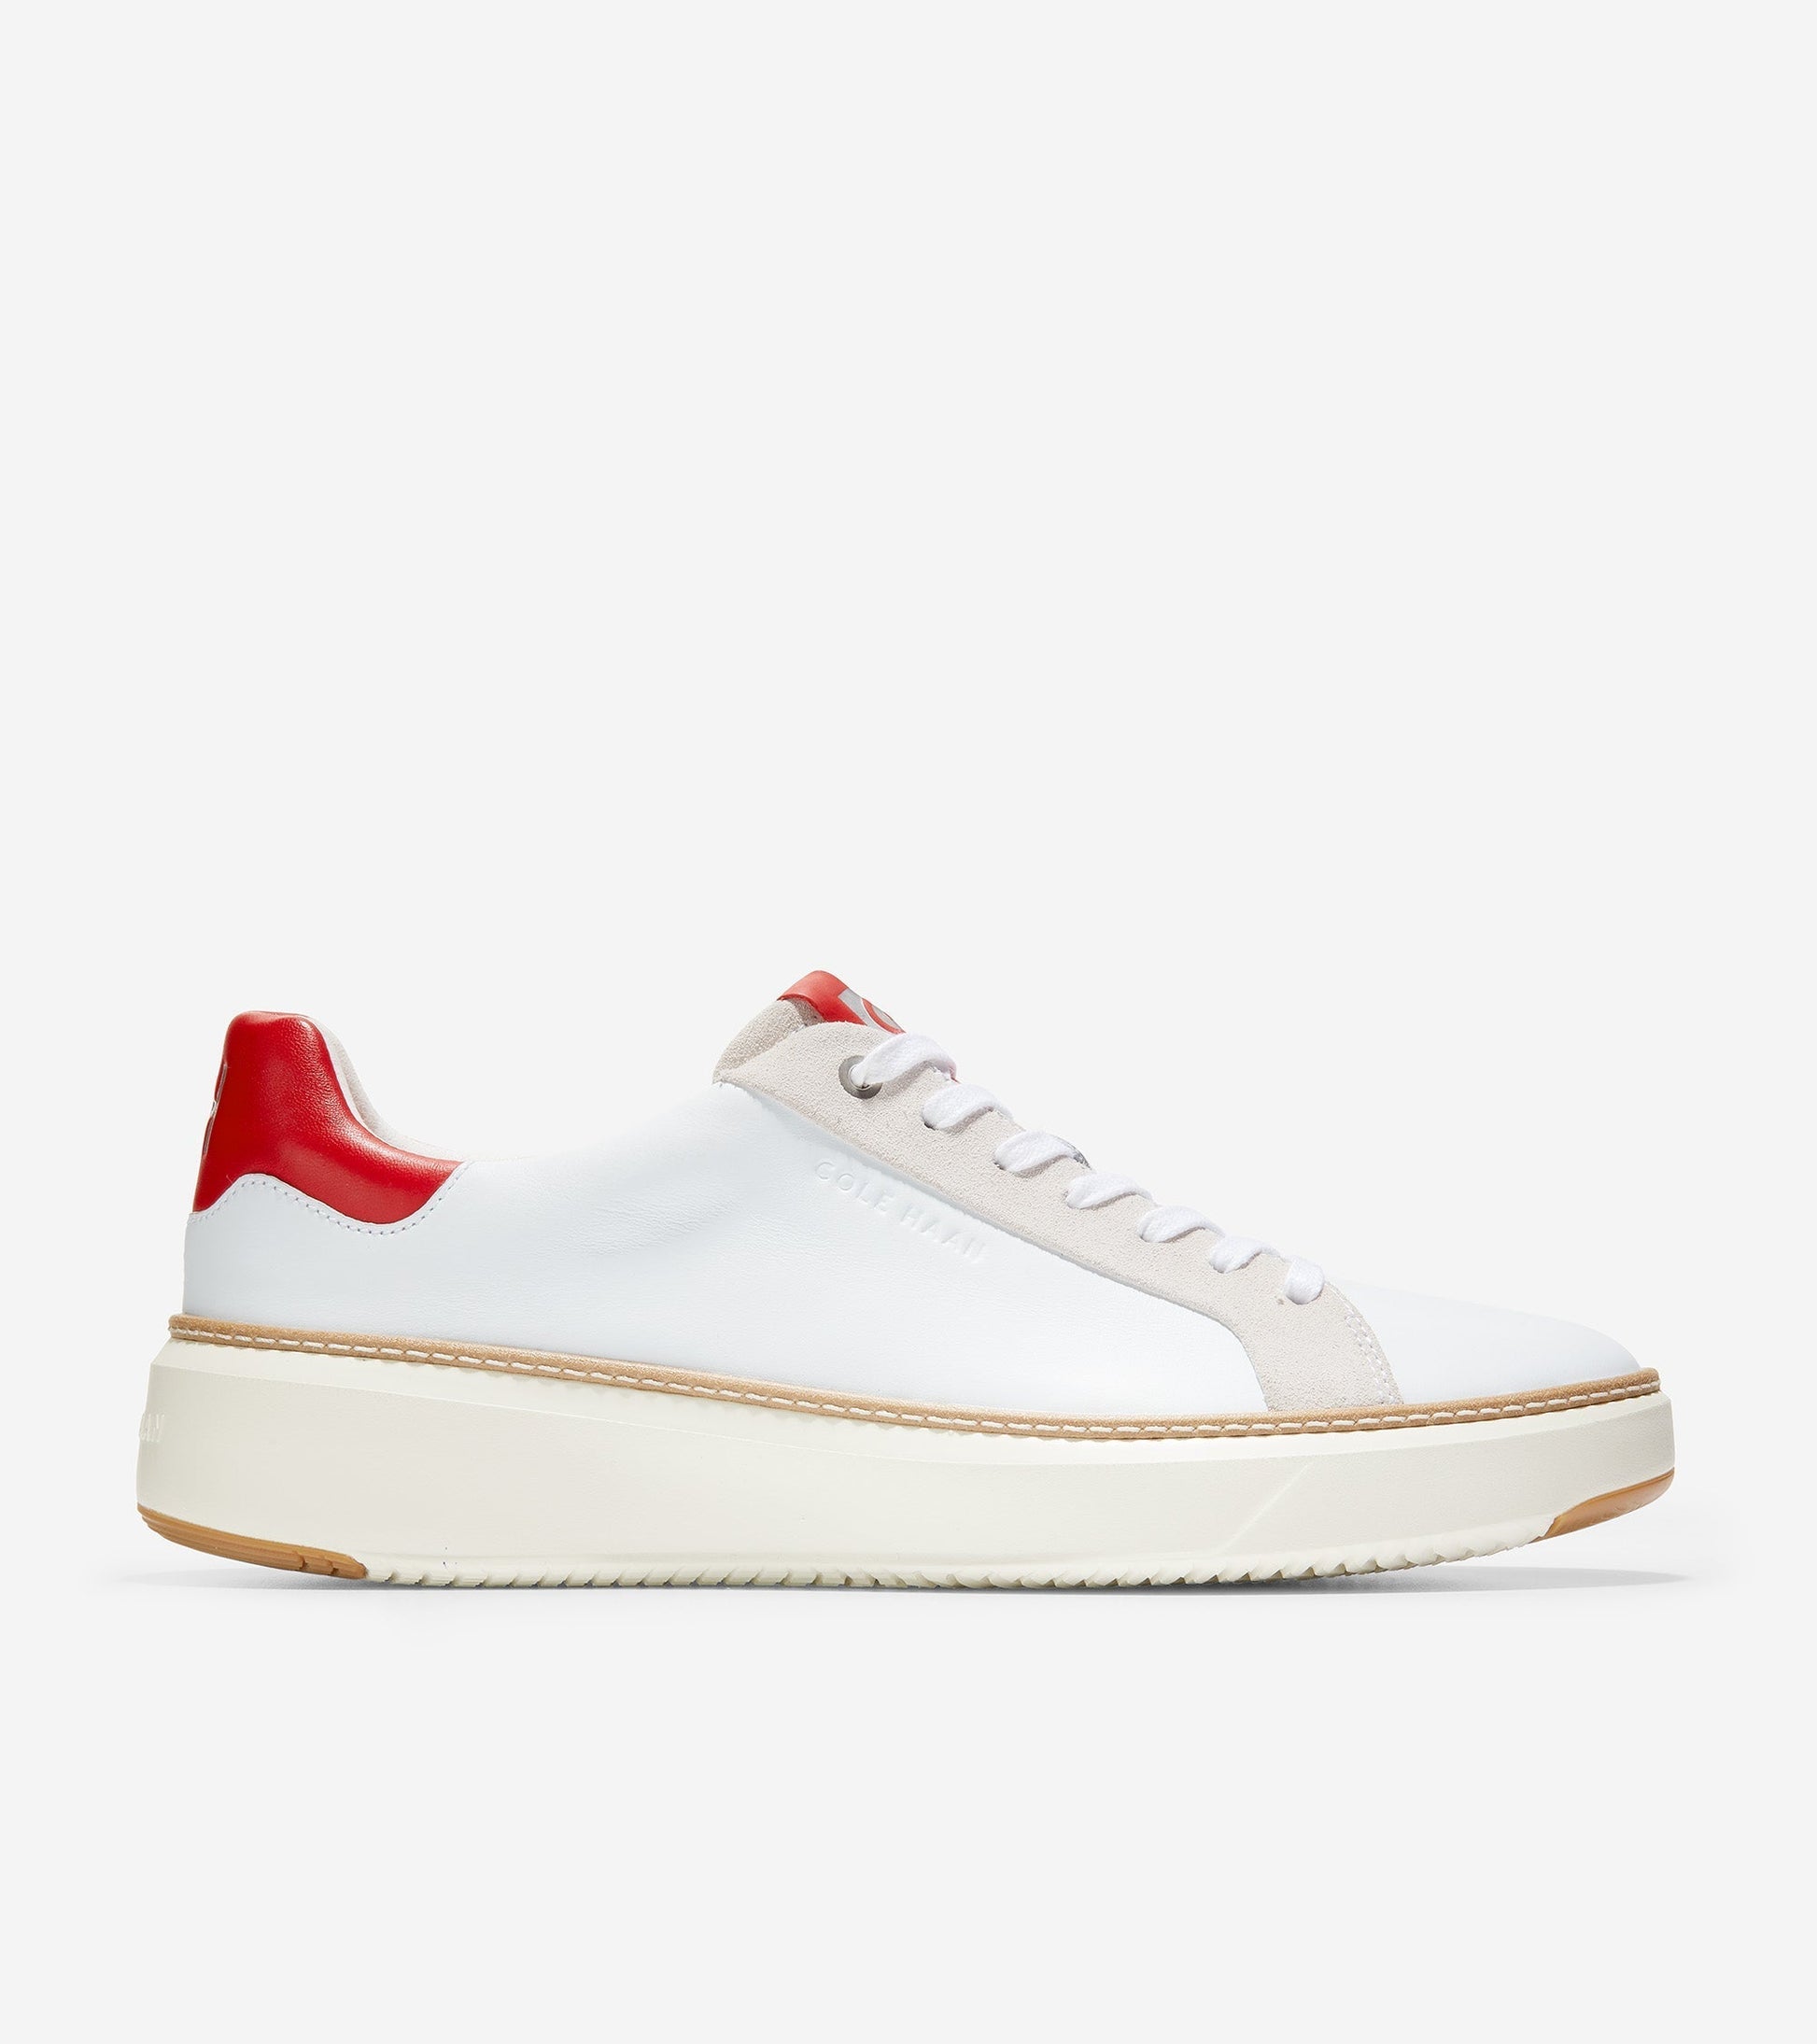 GrandPrø Topspin Sneakers - Cole Haan Germany